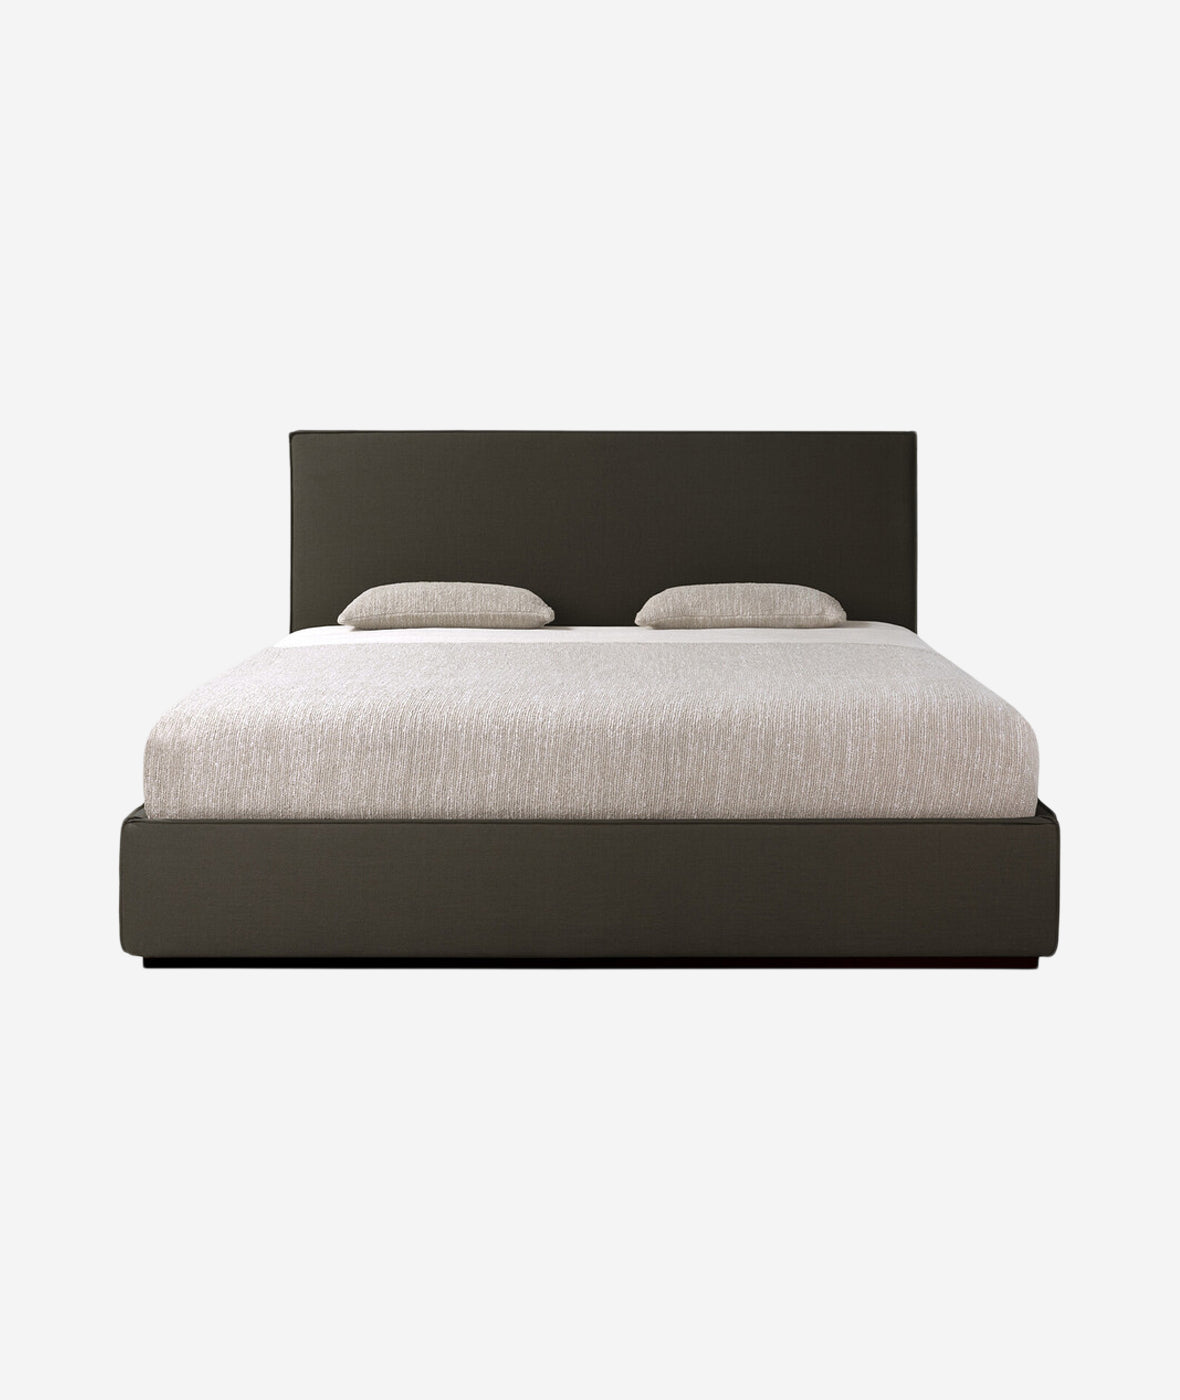 Revive Bed - More Options